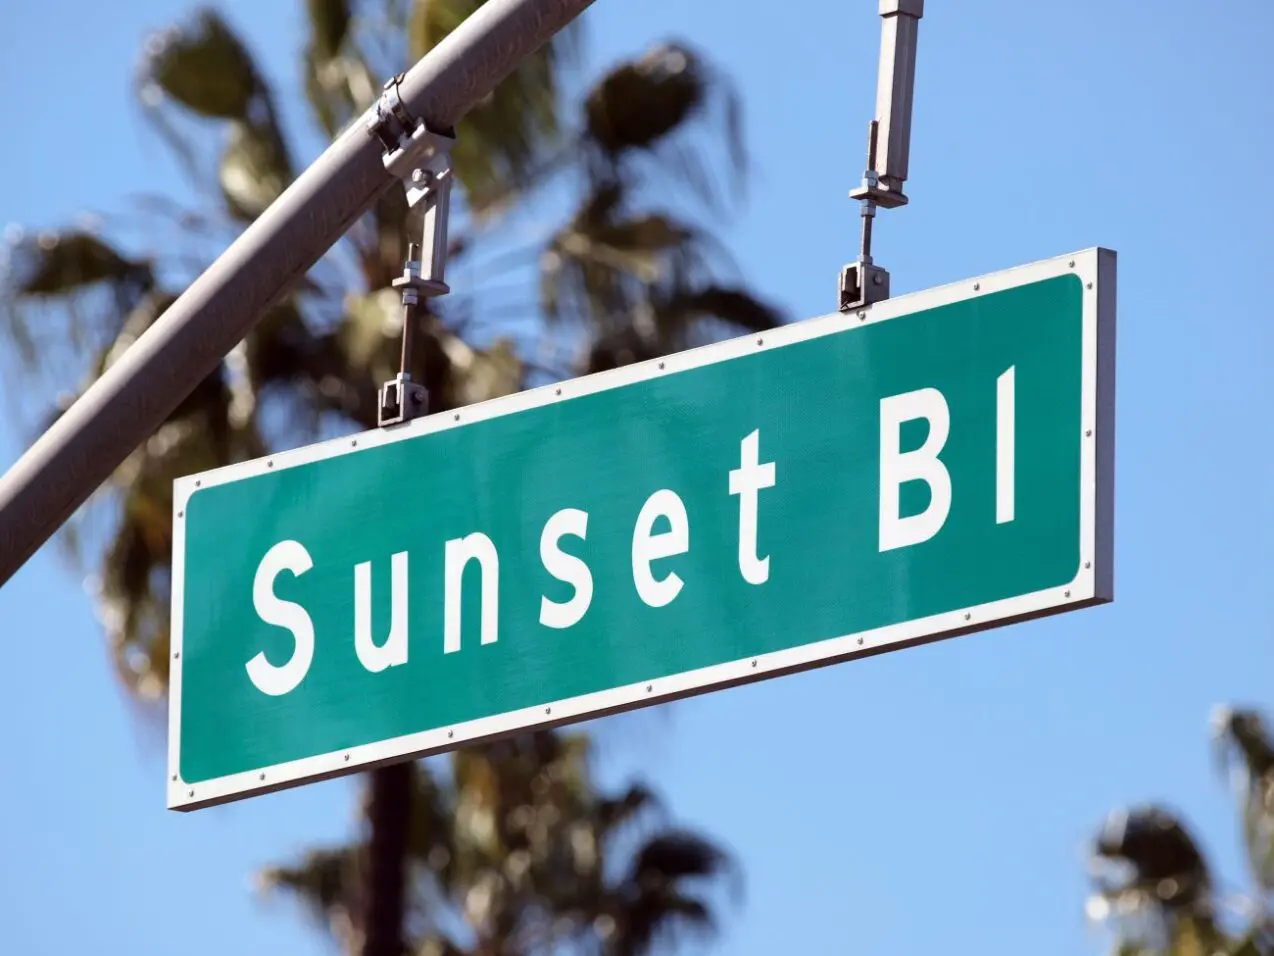 The ultimate guide to L.A.'s legendary Sunset strip: Where to stay, eat, drink and play